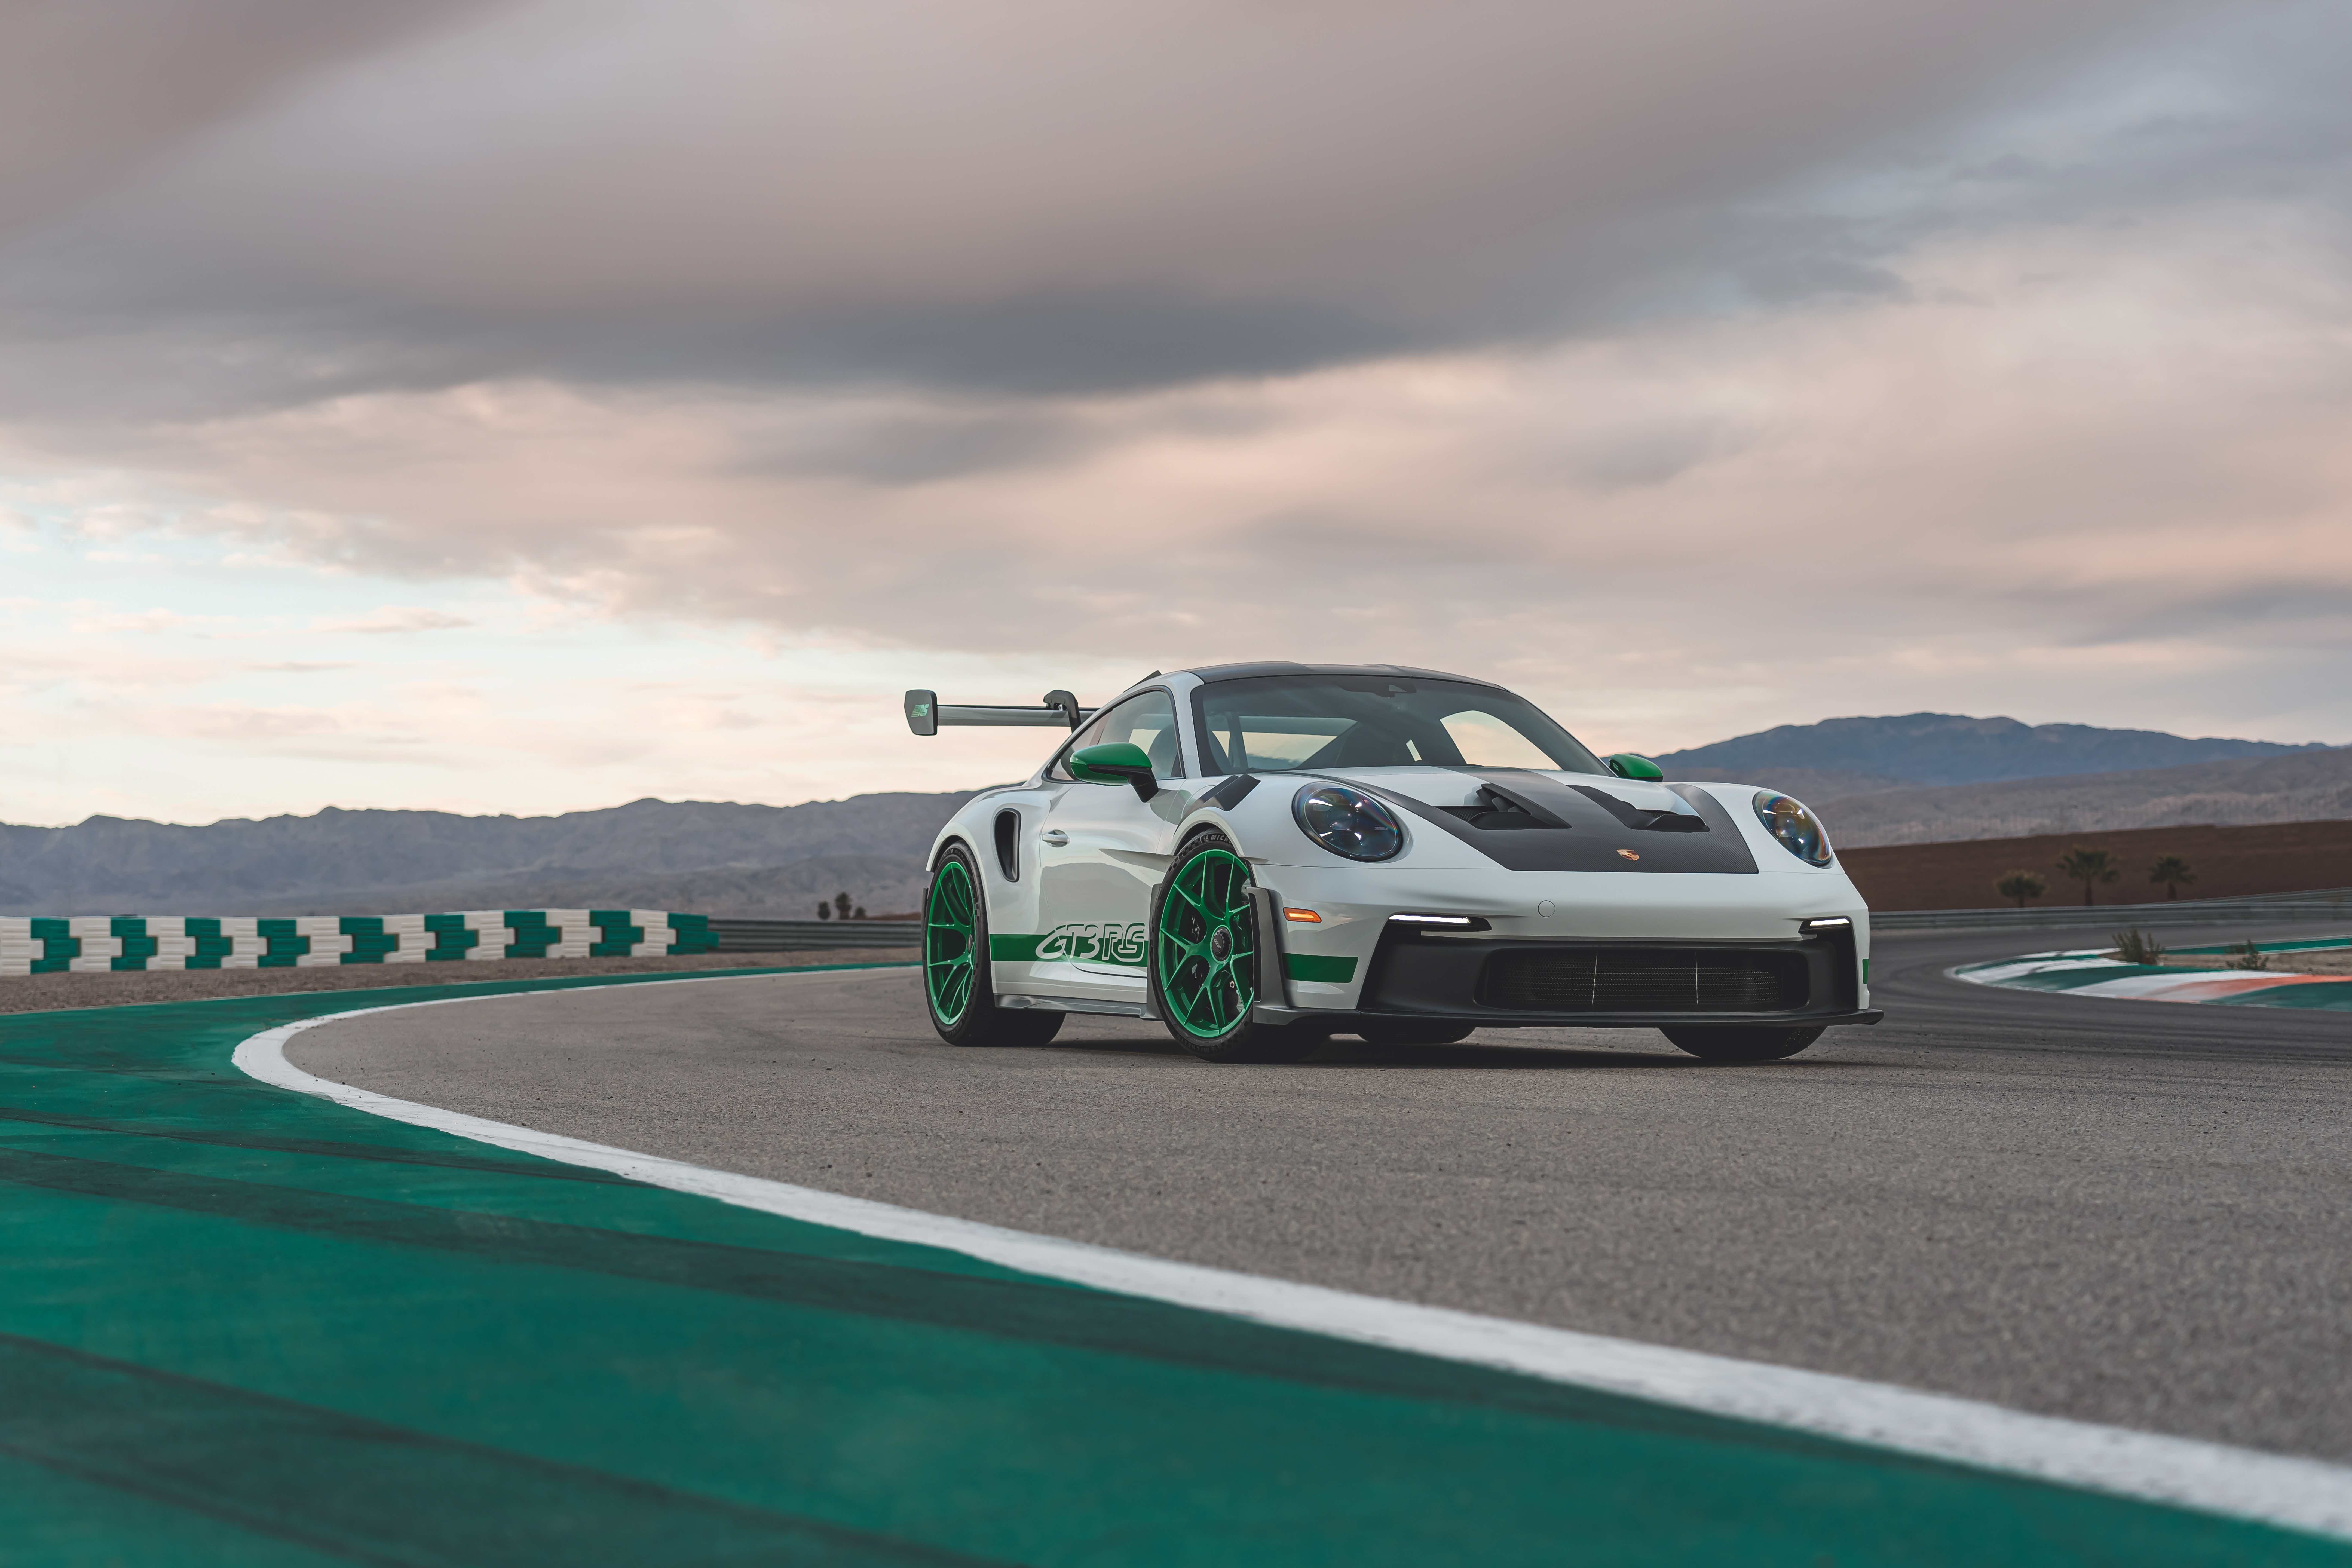 A Porsche 911 Carrera GTS to celebrate the 24 Hours of Le Mans Centenary